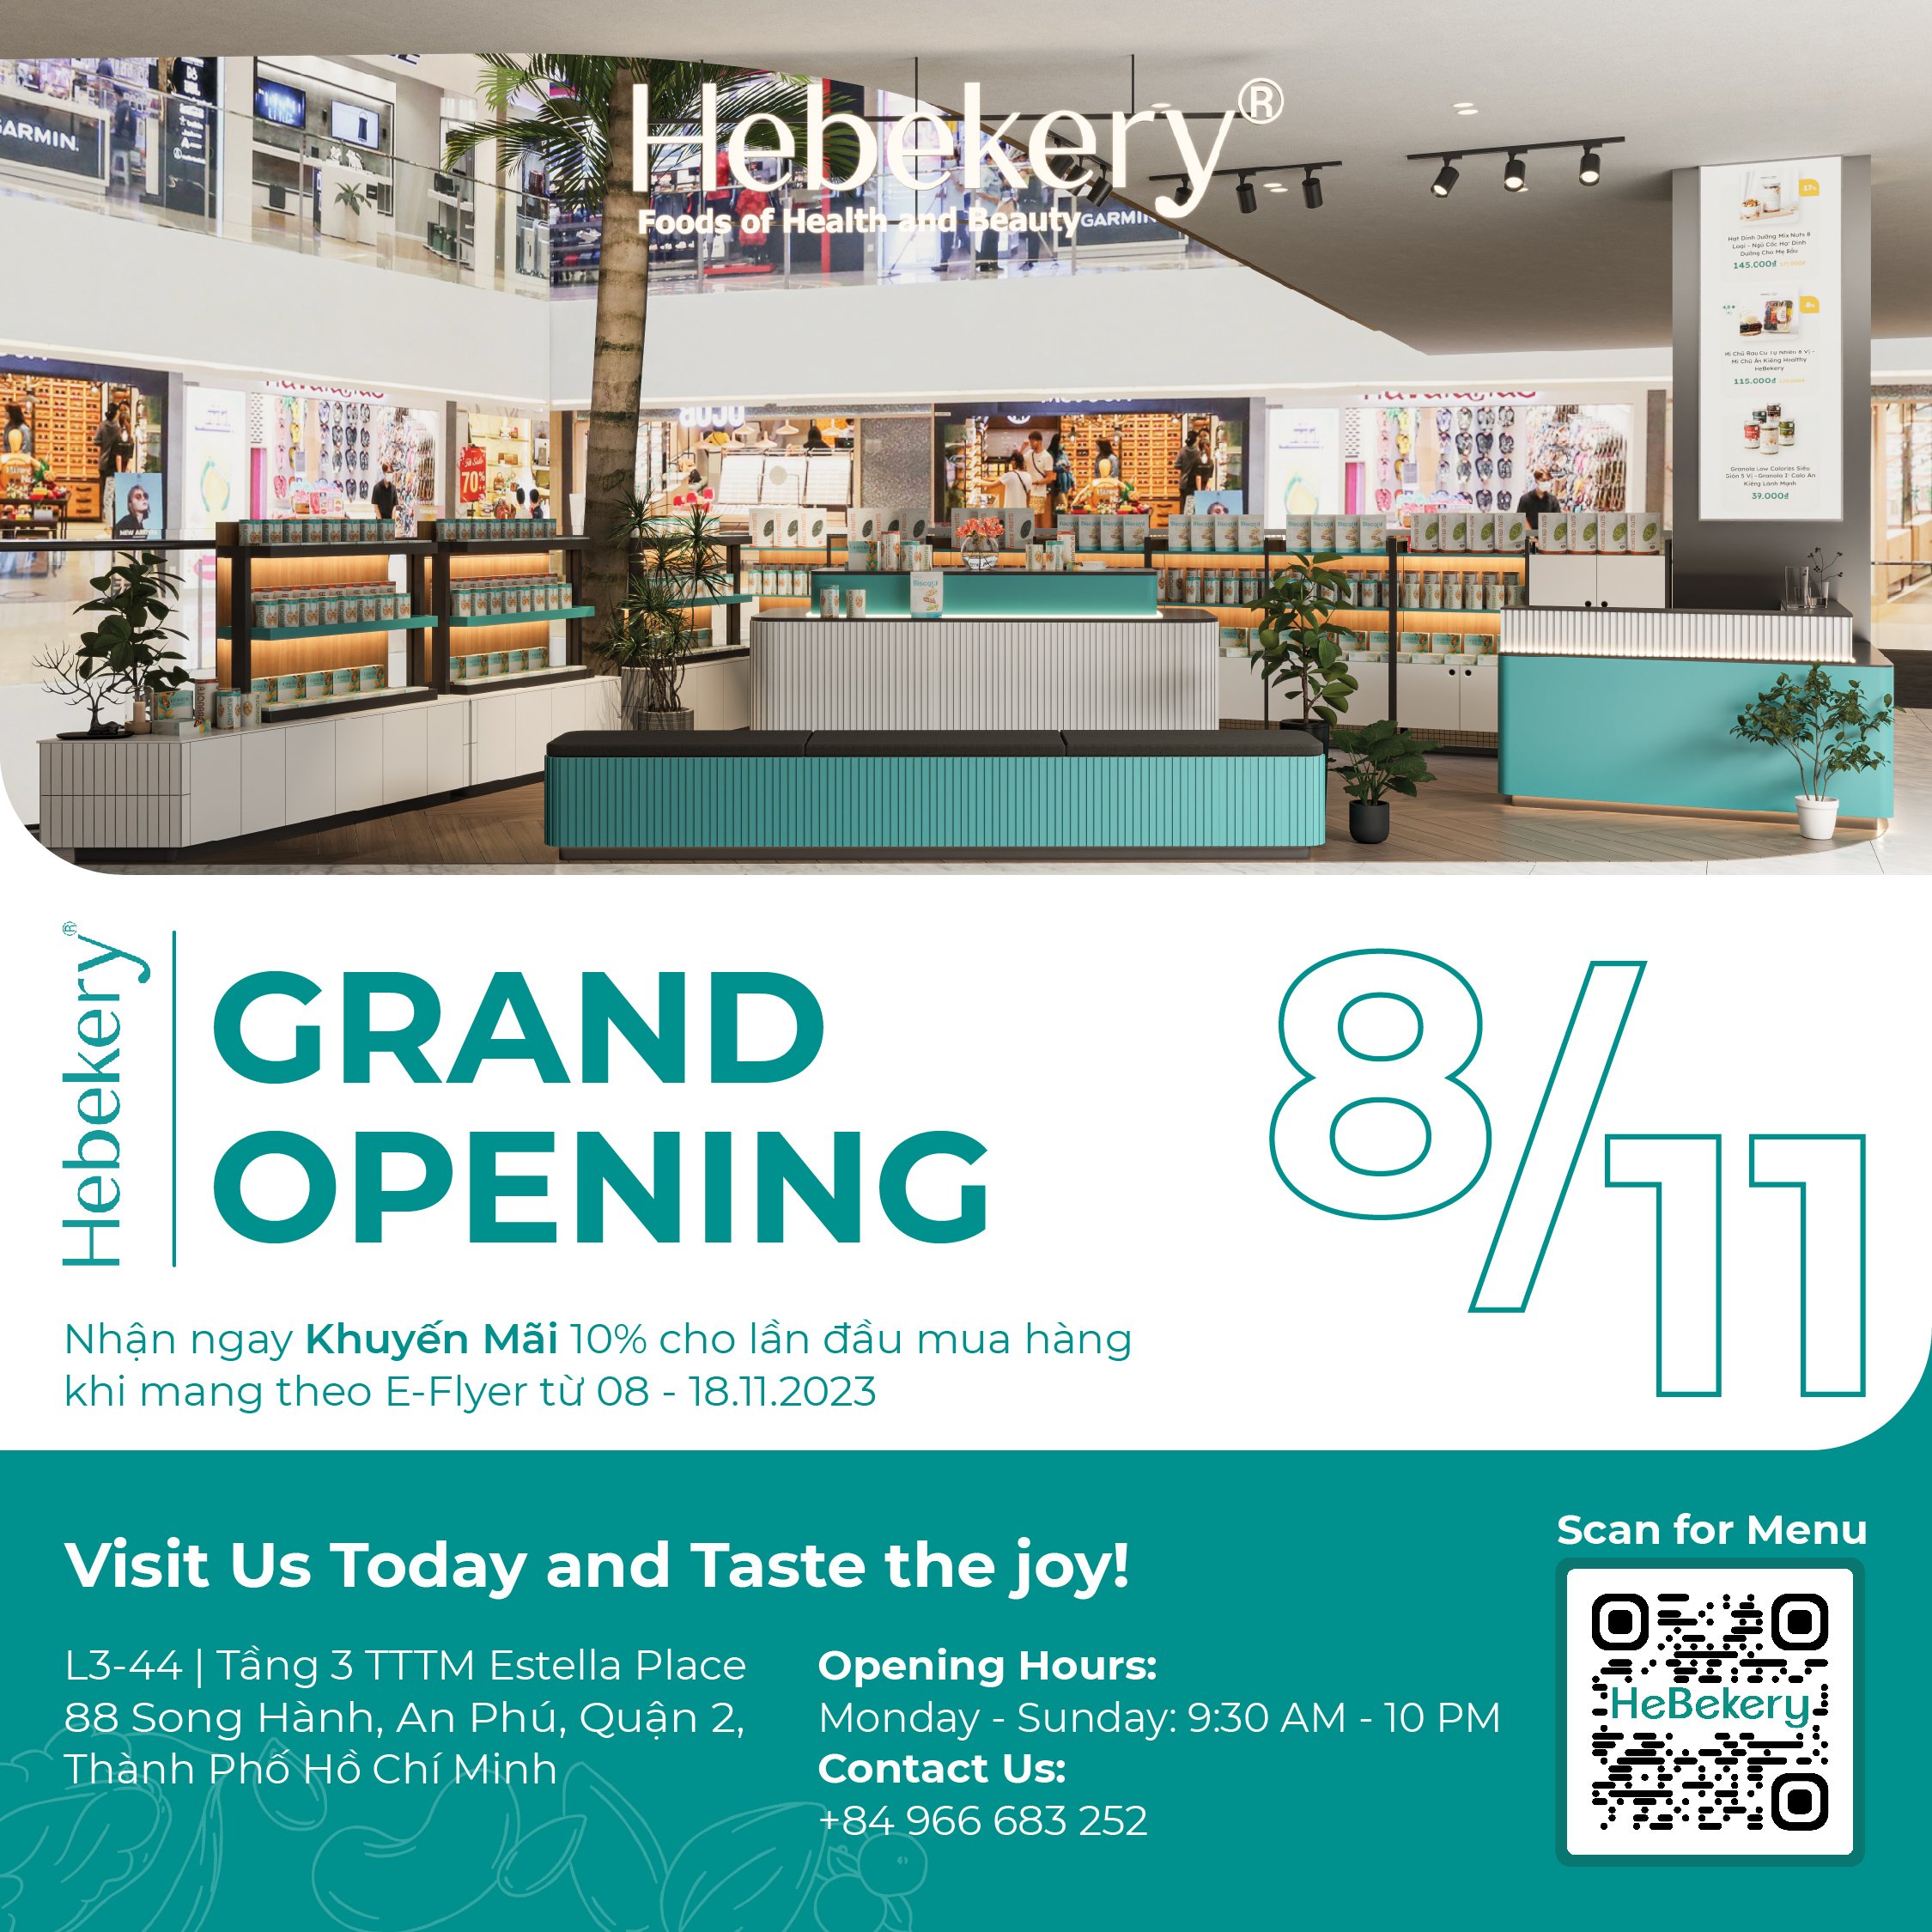 🌿🎈 GRAND OPENING: EAT WELL - LIVE HEALTHY - STAY YOUNG WITH HEBEKERY 🎈🌿